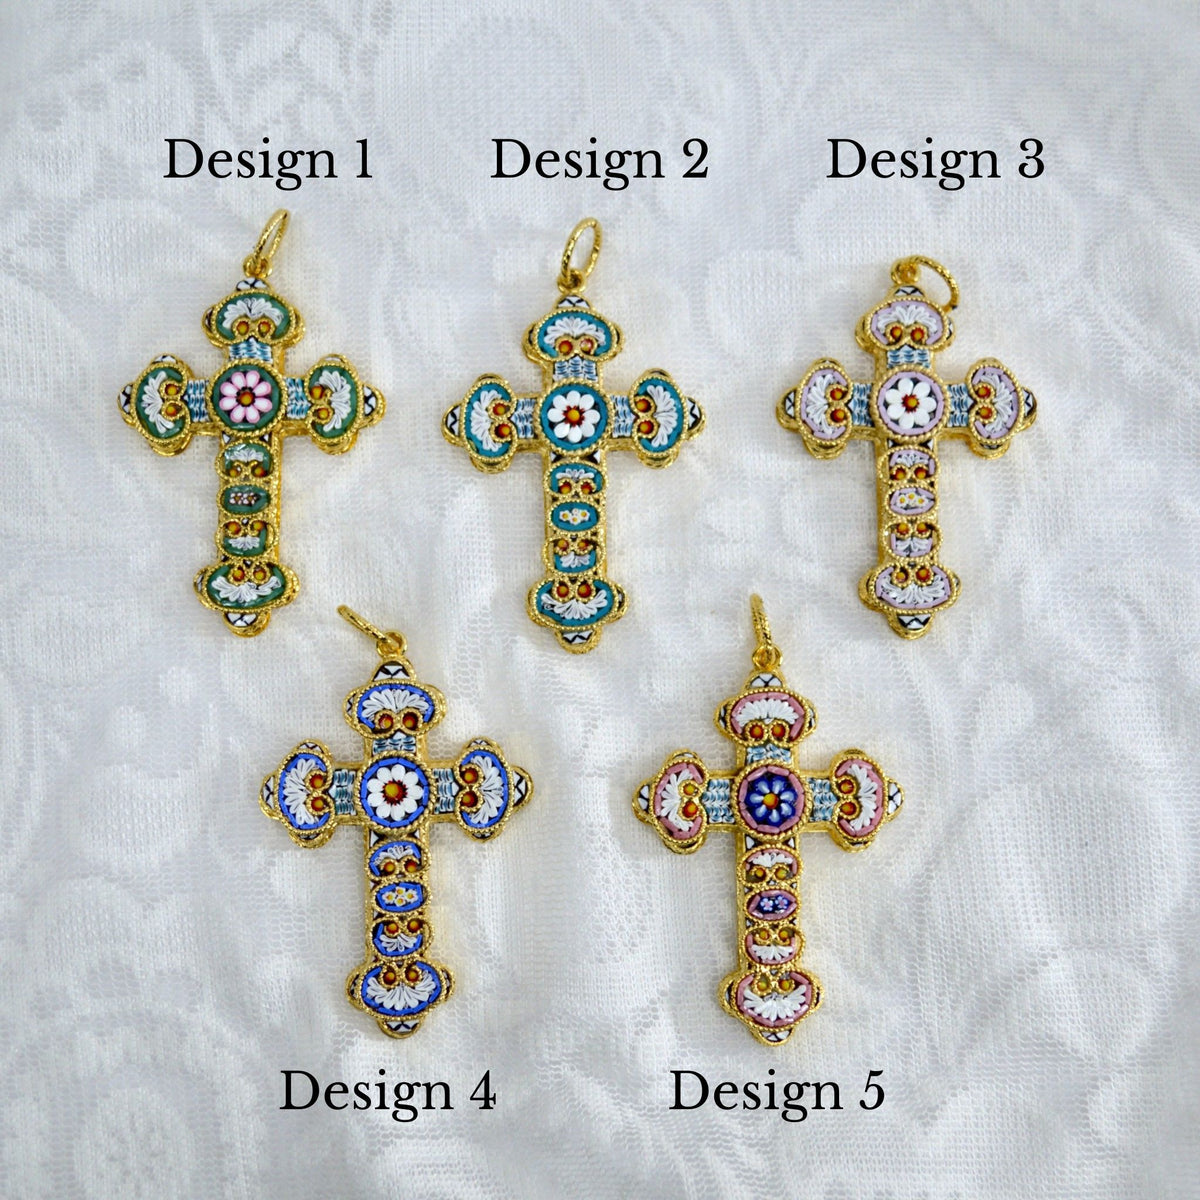 Florentine Glass Mosaic Cross Pendant, Crafted In Italy - My Italian Decor